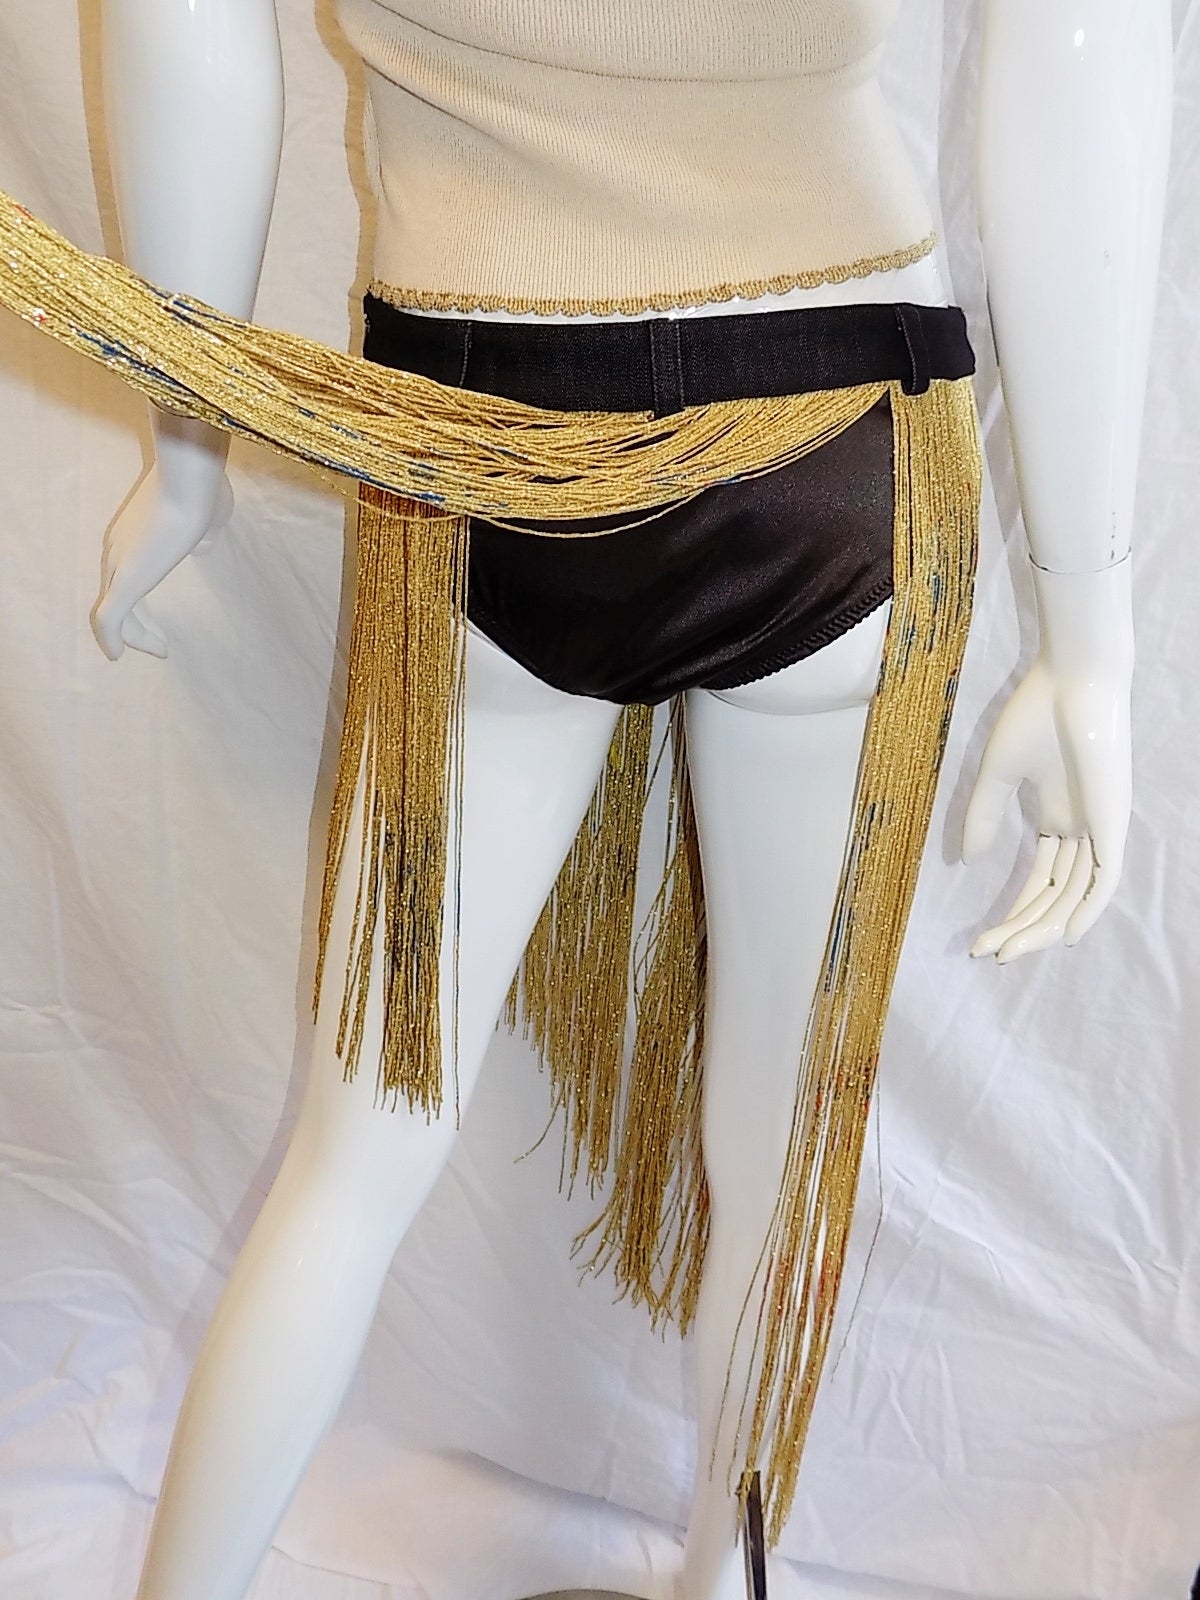 Dolce & Gabbana Metallic fringe  Burlesque skirt and top ensemble. In Excellent Condition For Sale In New York, NY